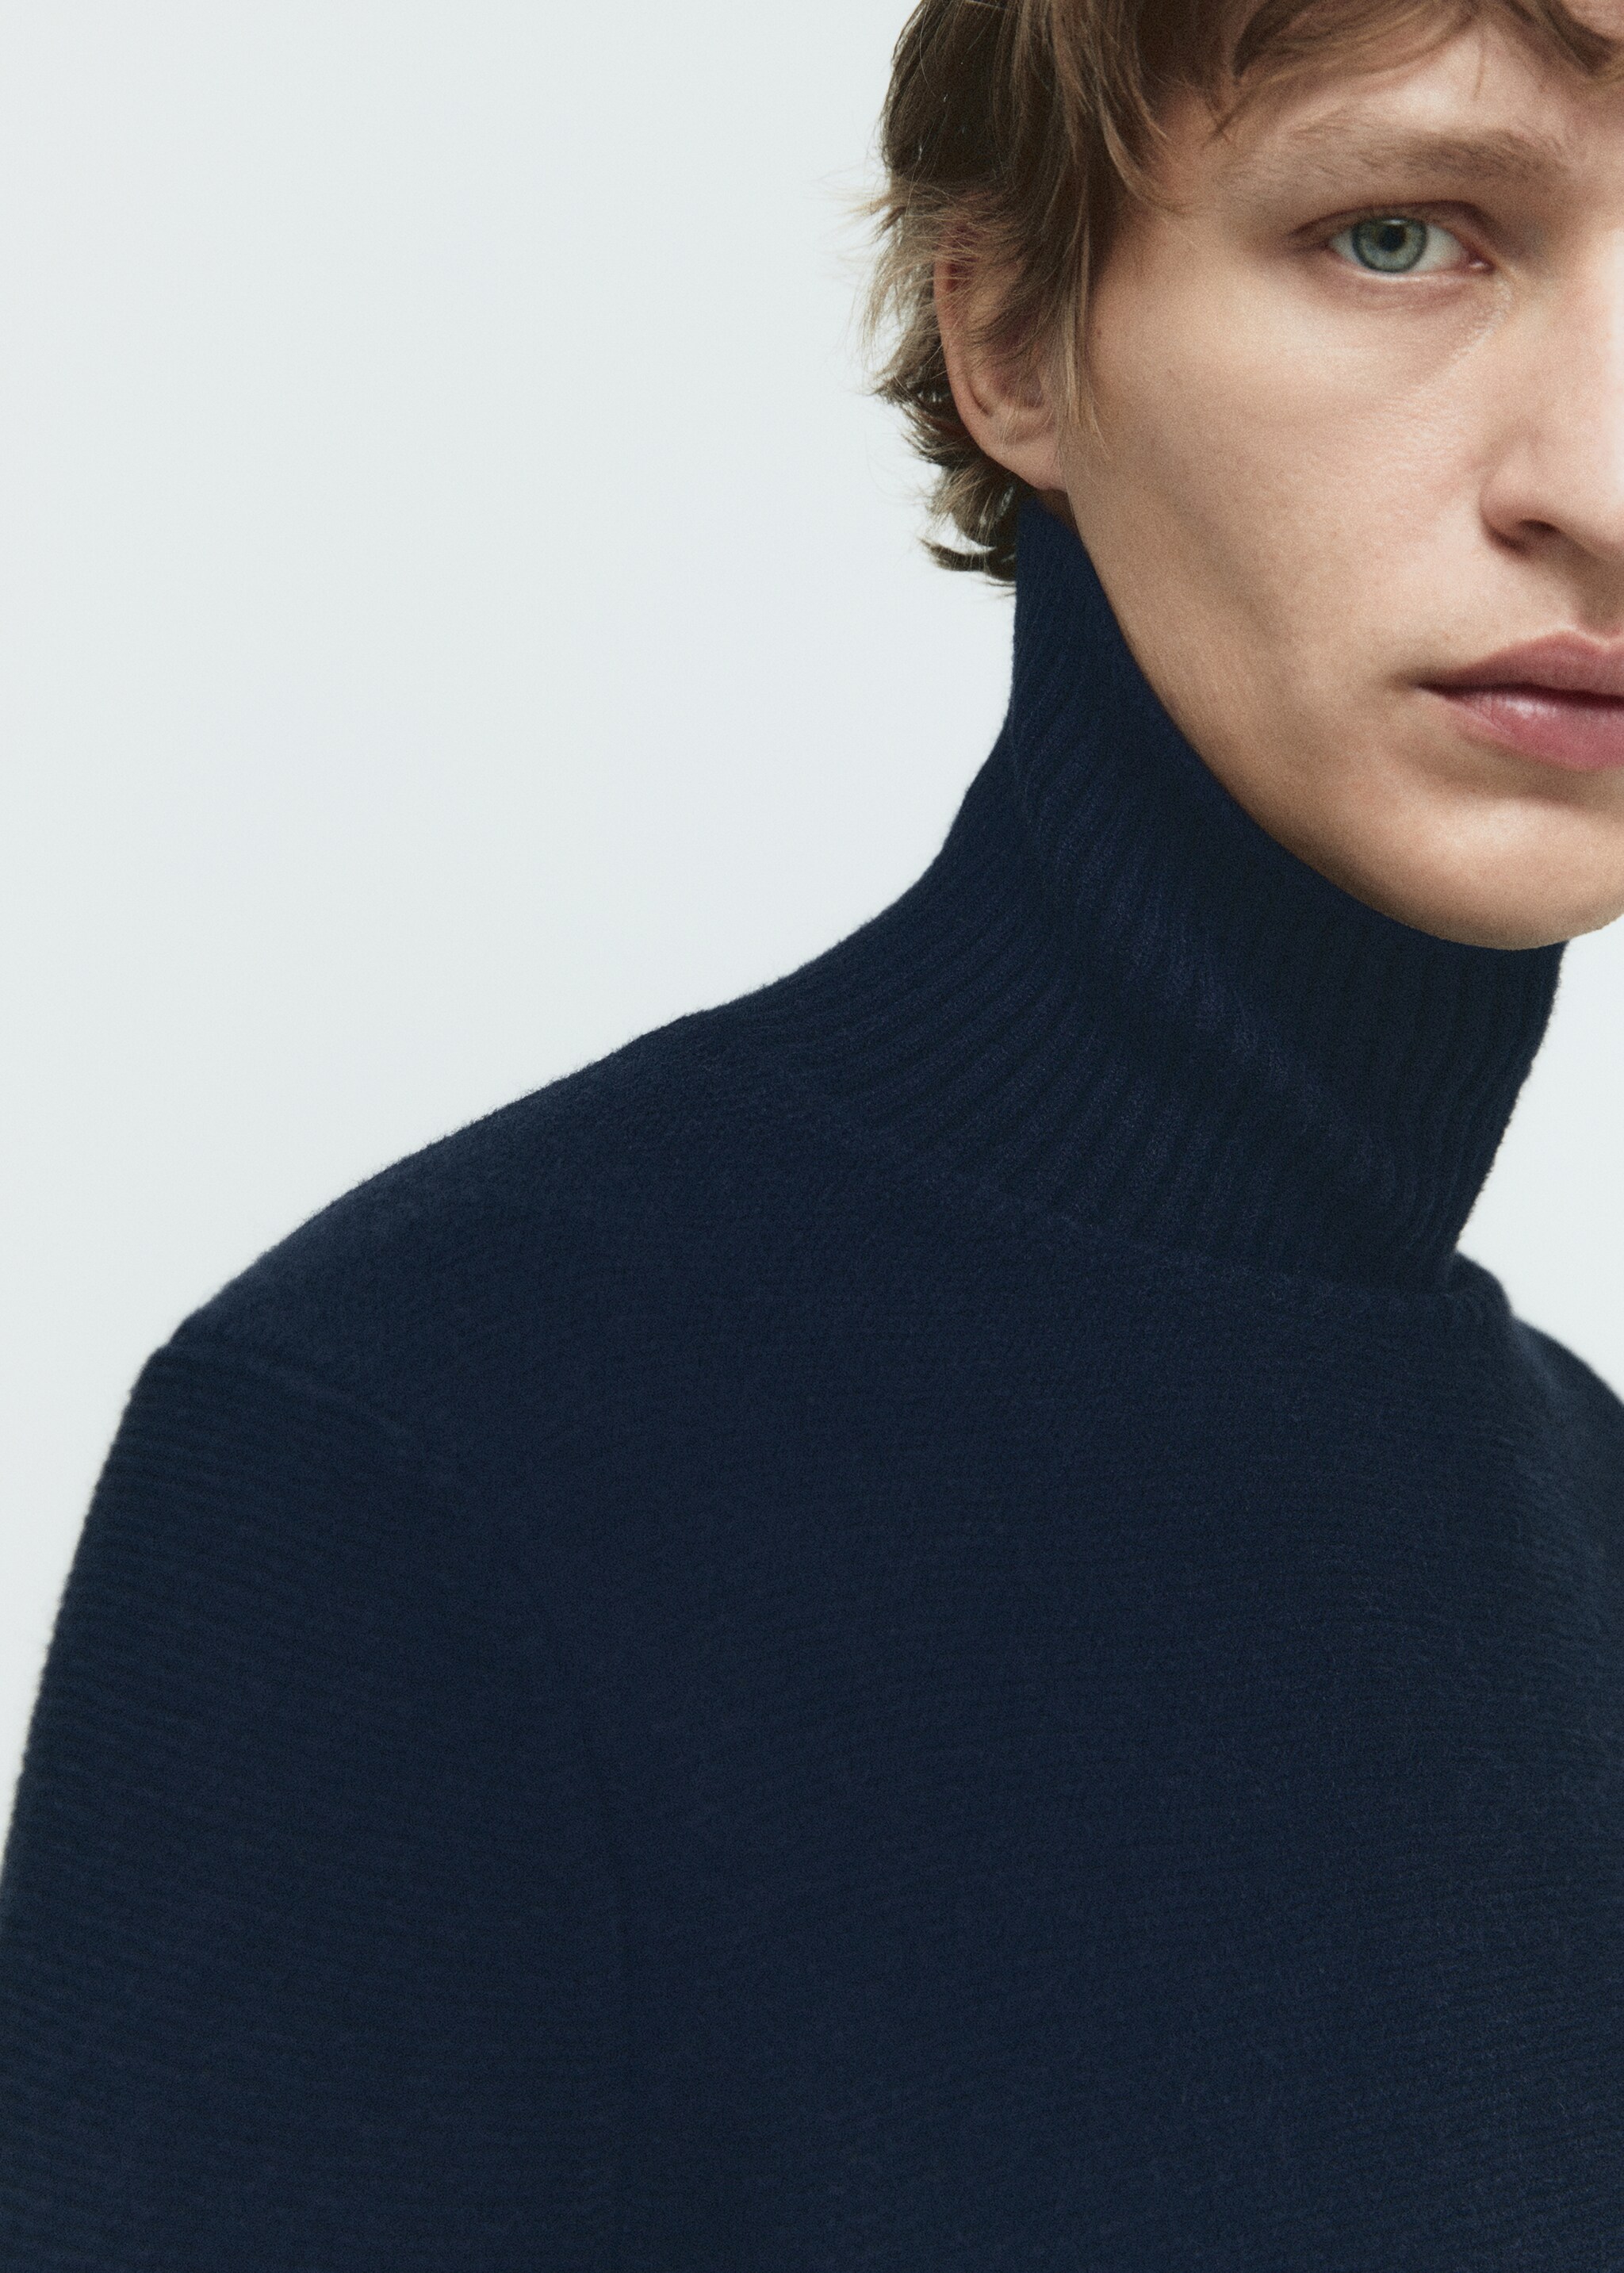 Turtleneck knit sweater - Details of the article 5